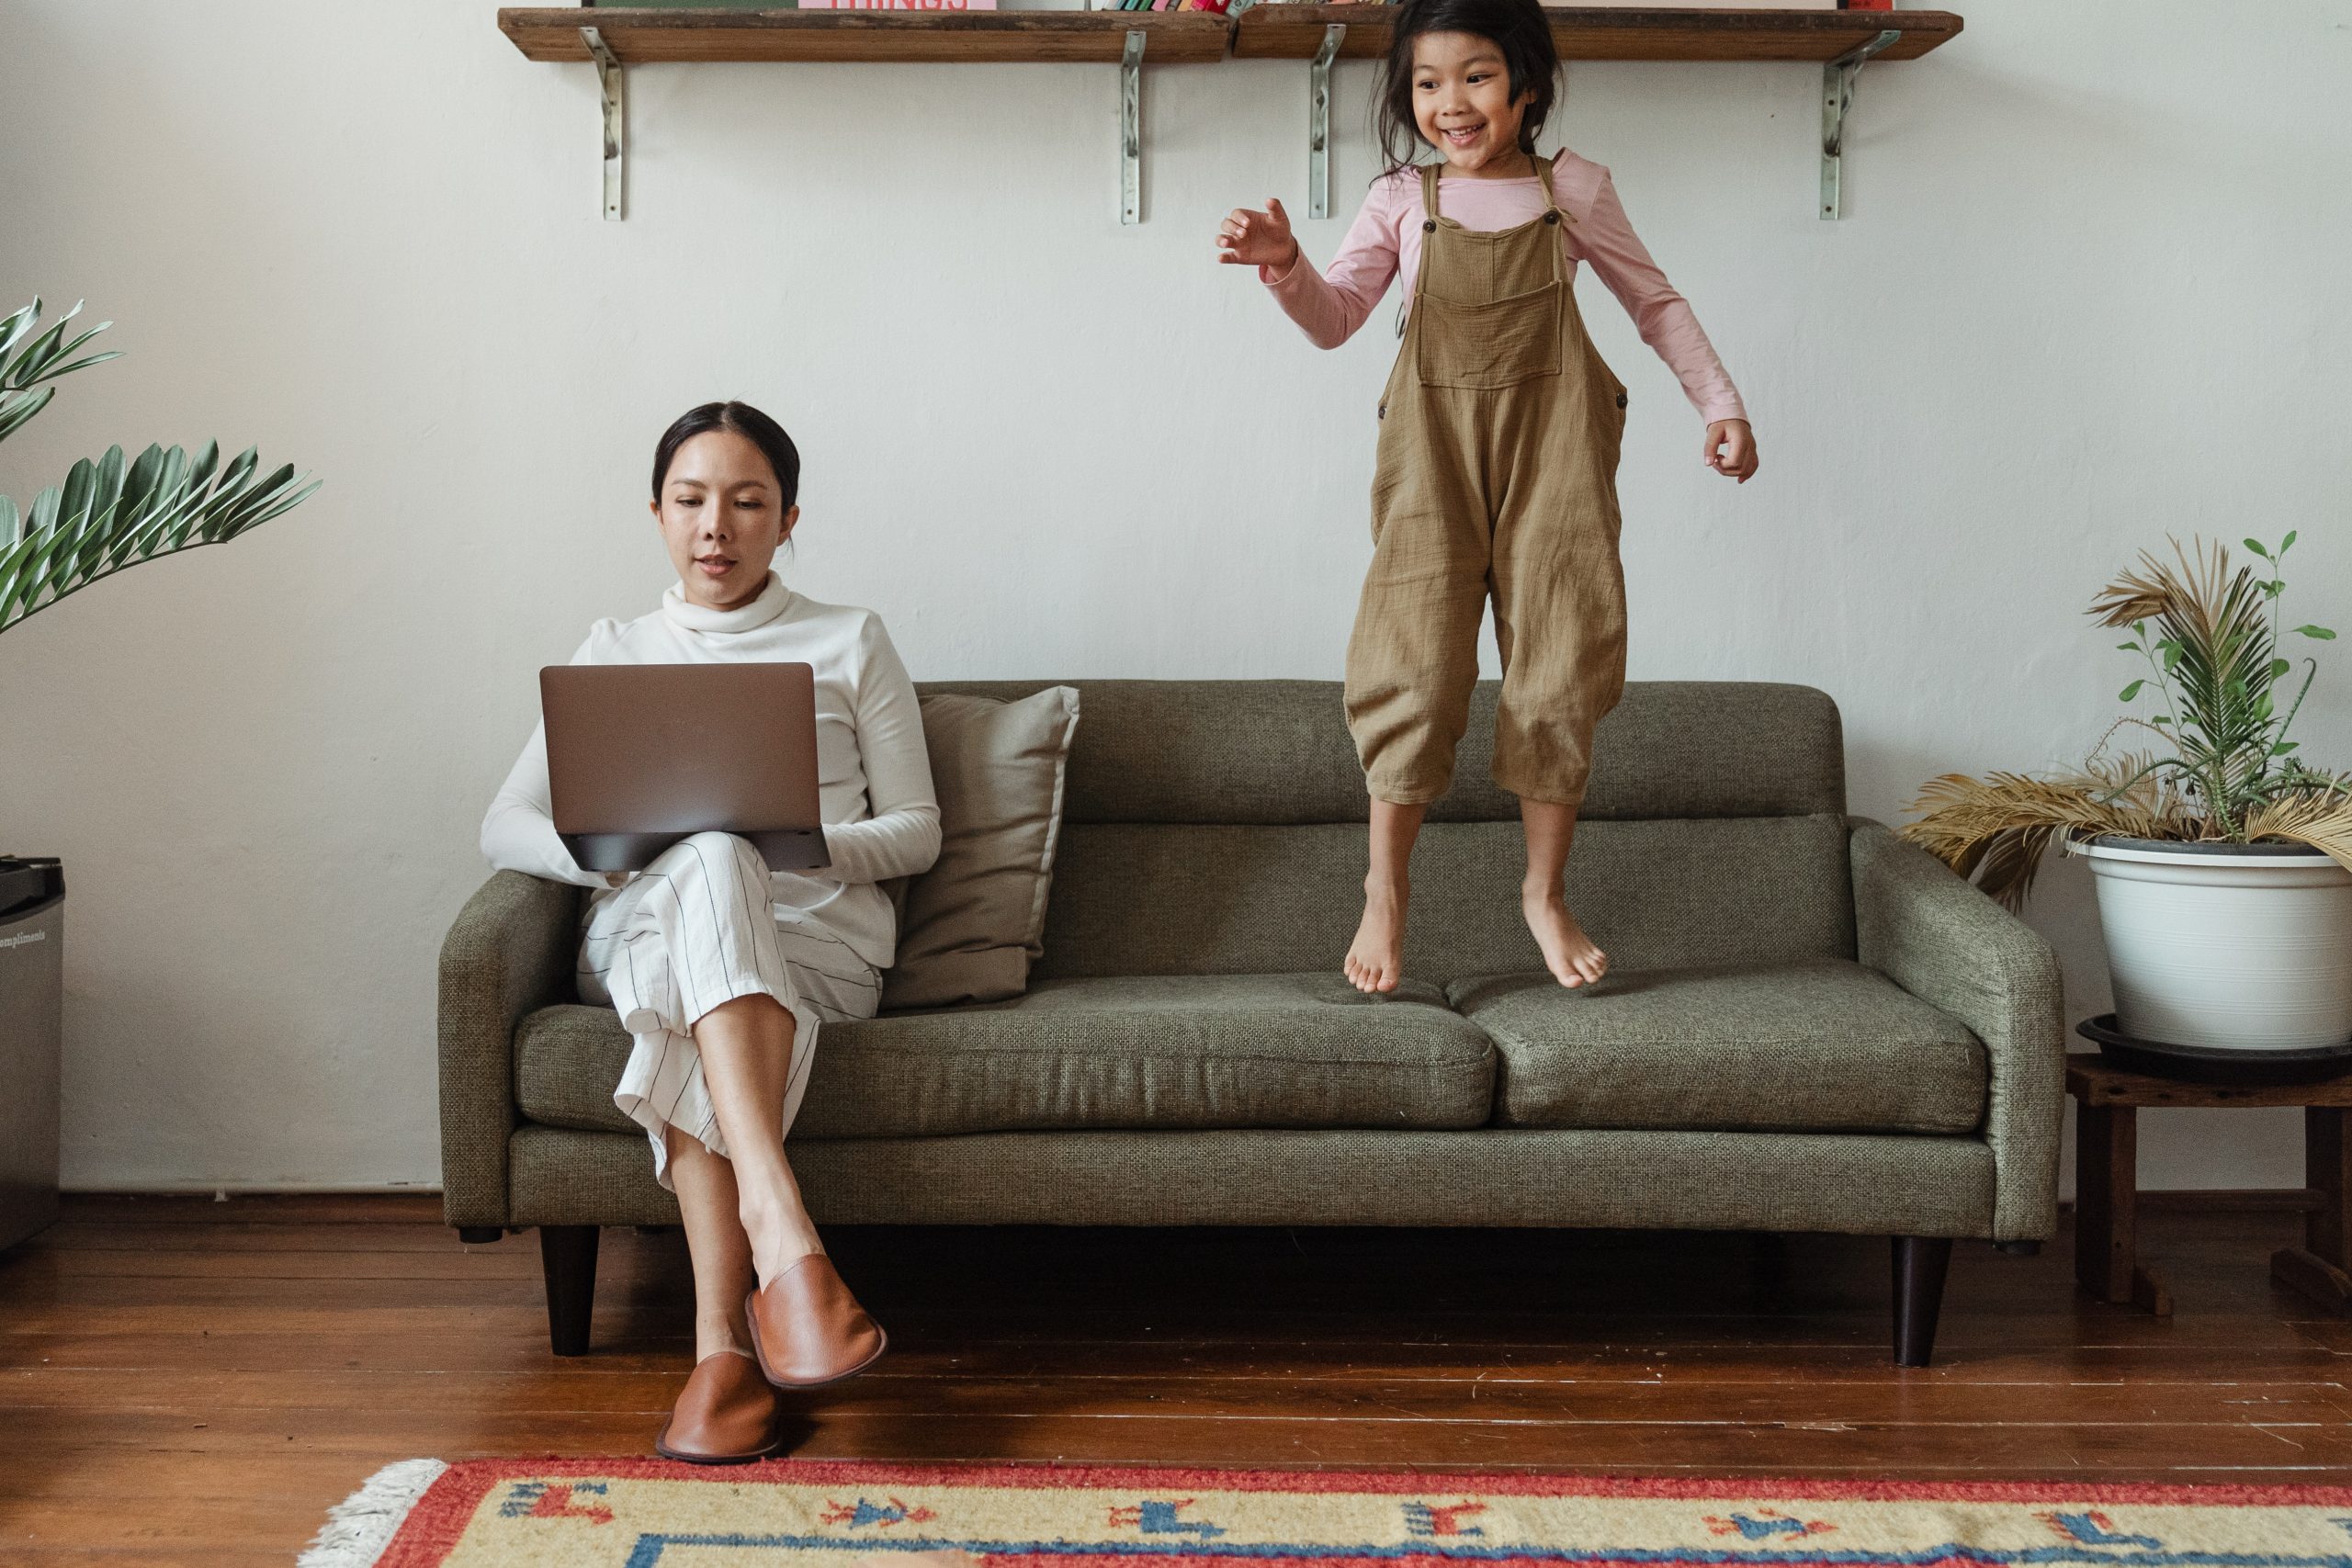 Parent trying to work at home while kid jumps on couch